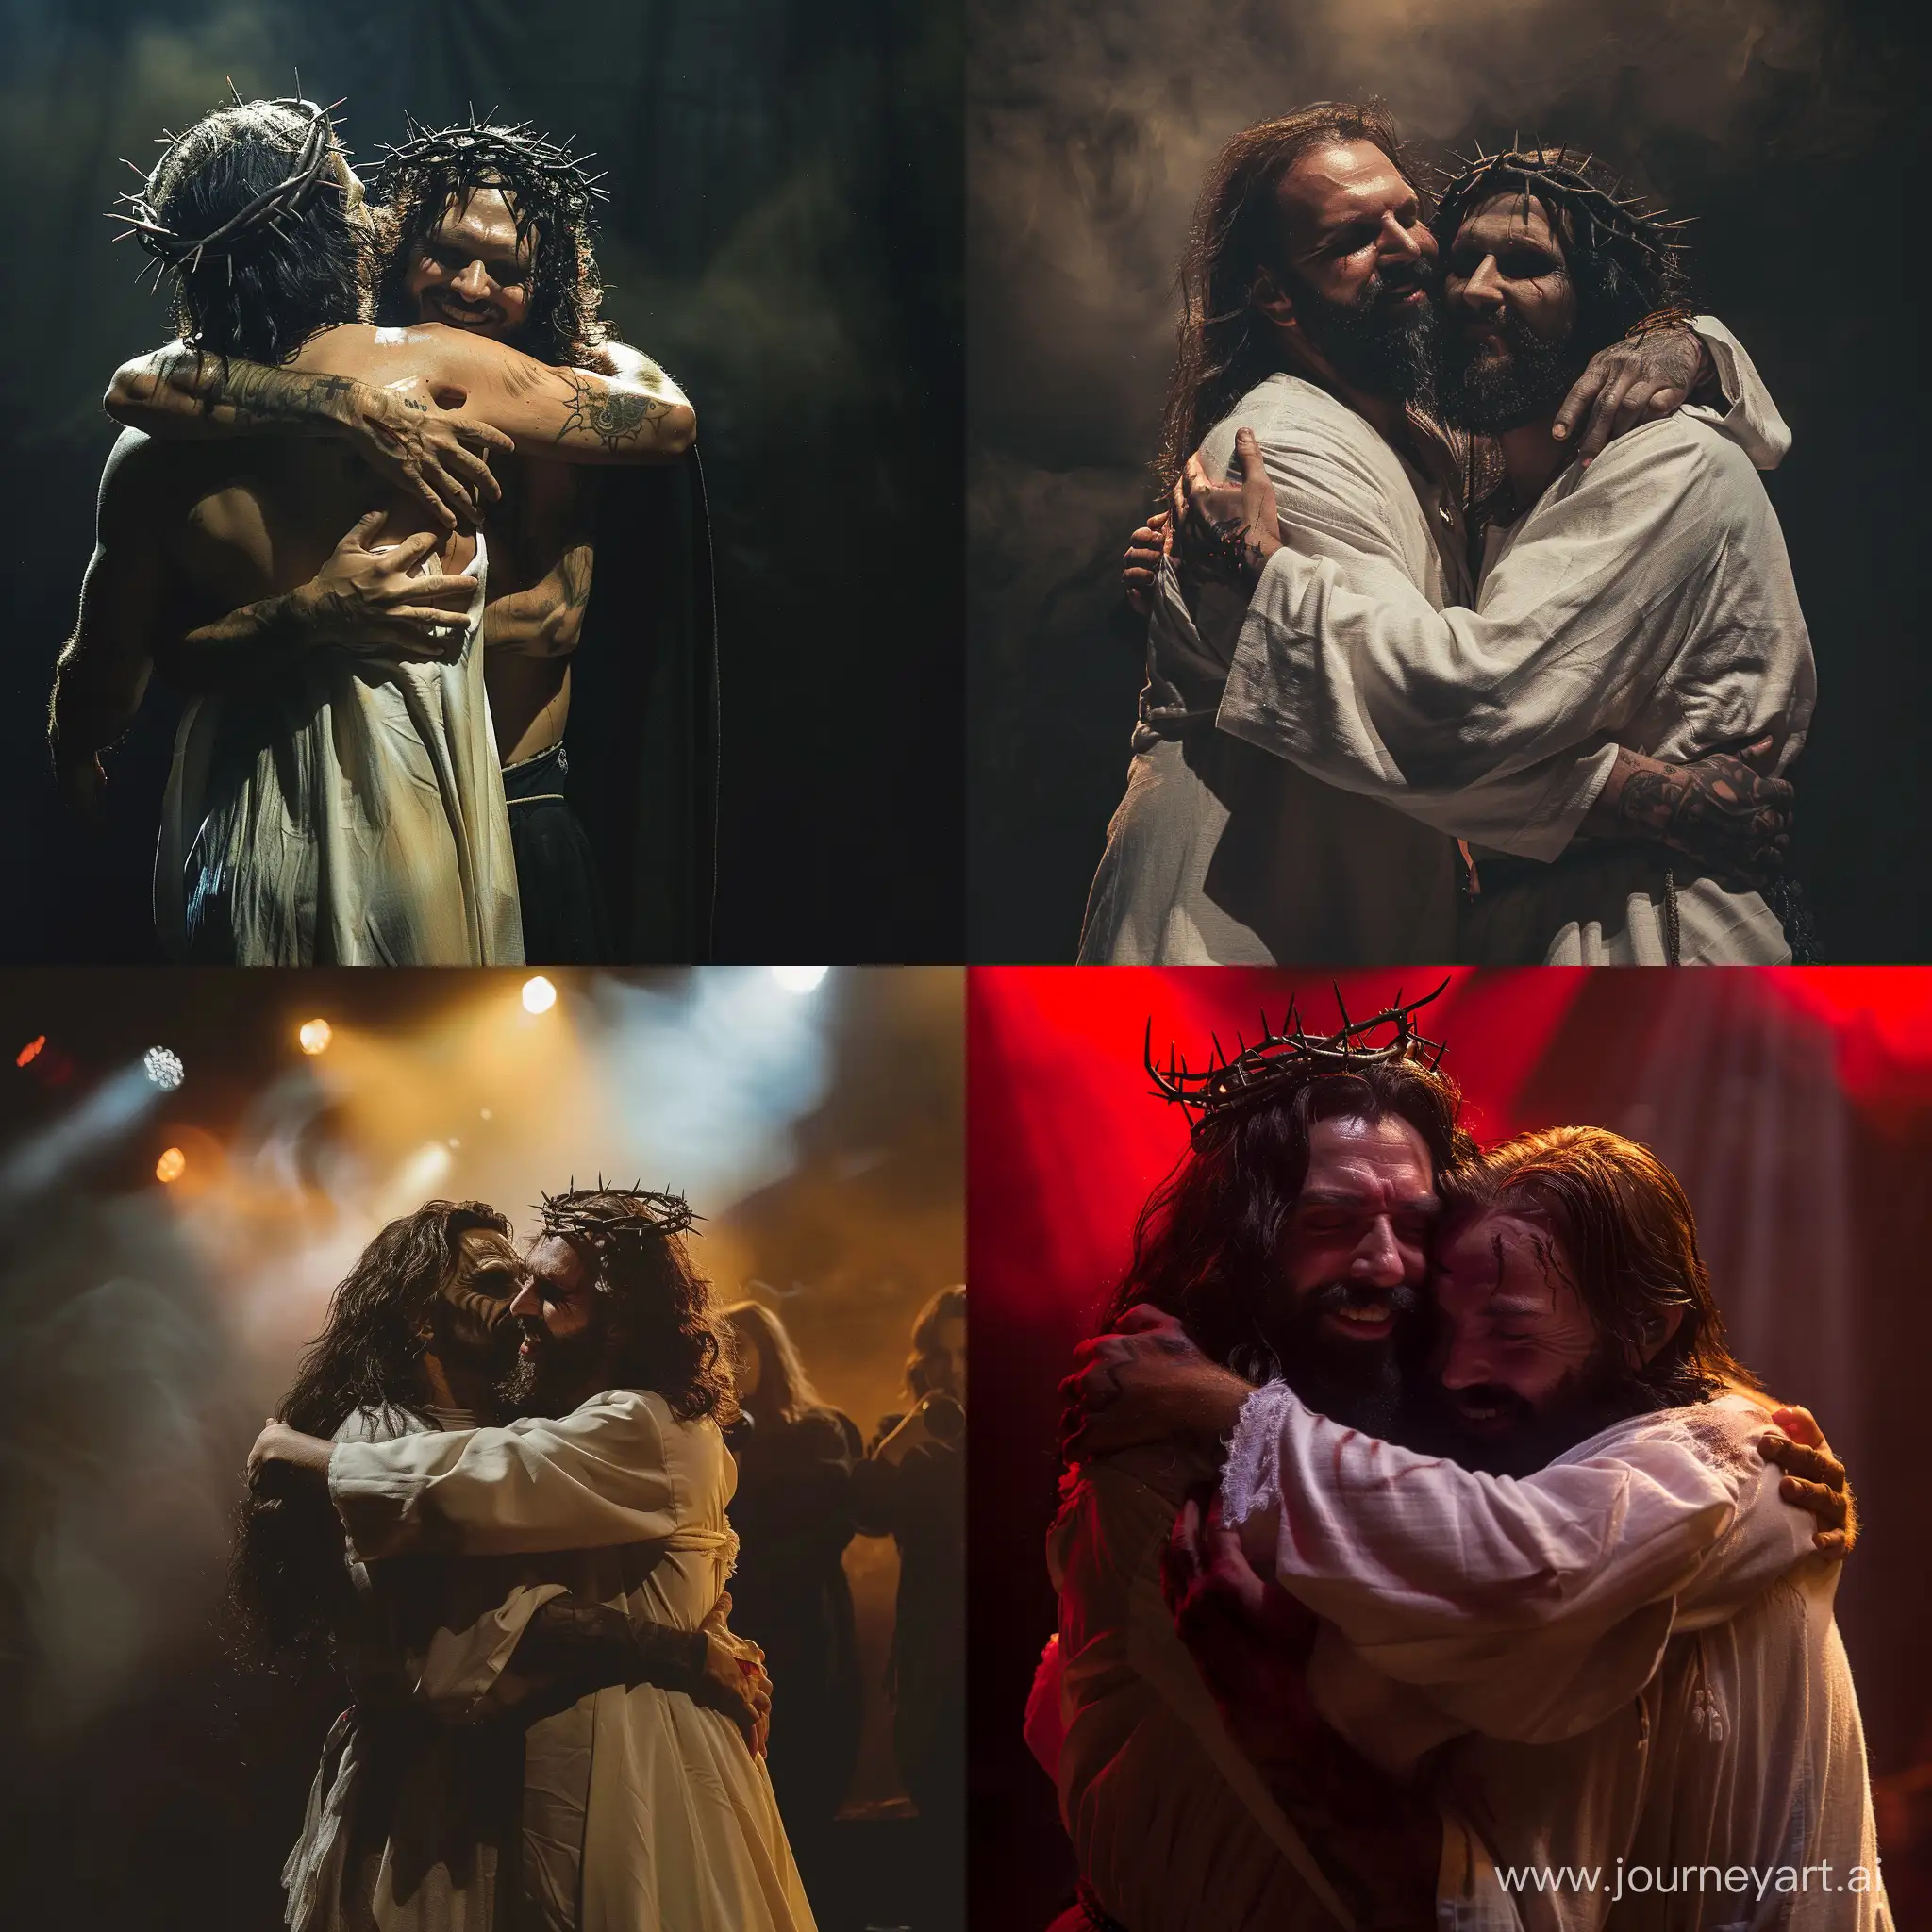 Satan-Embraces-Jesus-in-a-Profound-Moment-of-Reconciliation-at-a-Cinematic-Concert